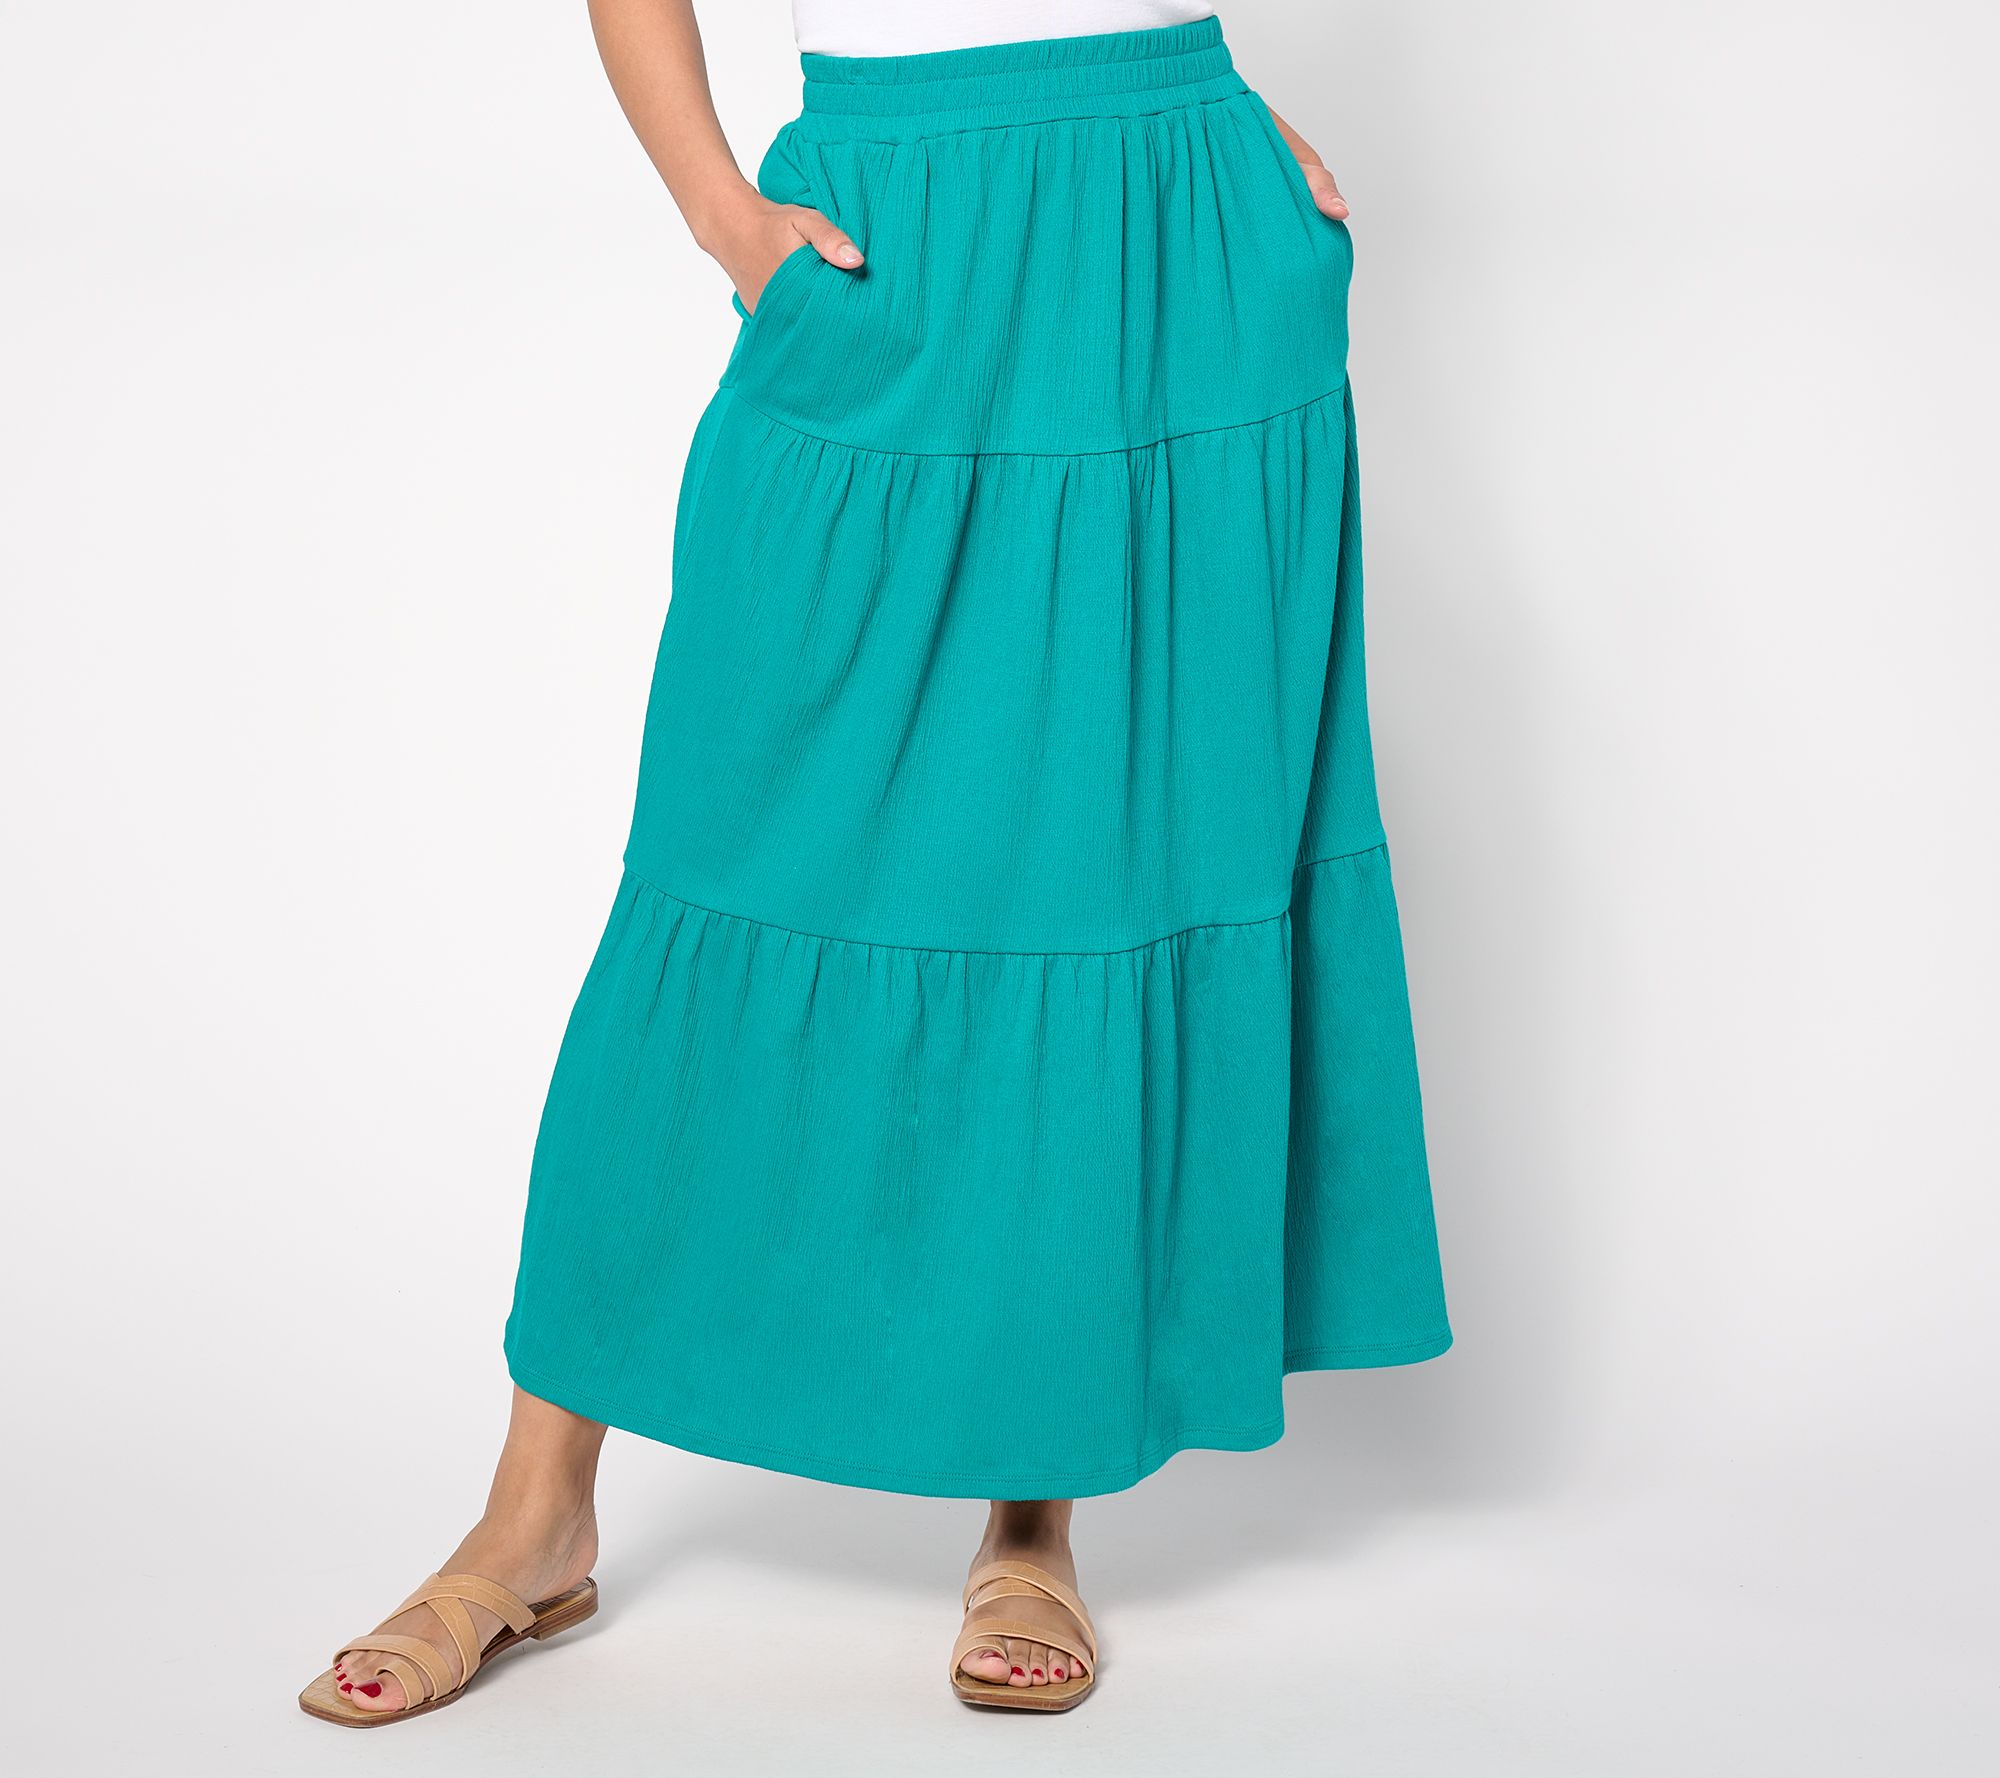 Belle by Kim Gravel Packabelle Tiered Maxi Skirt - QVC.com